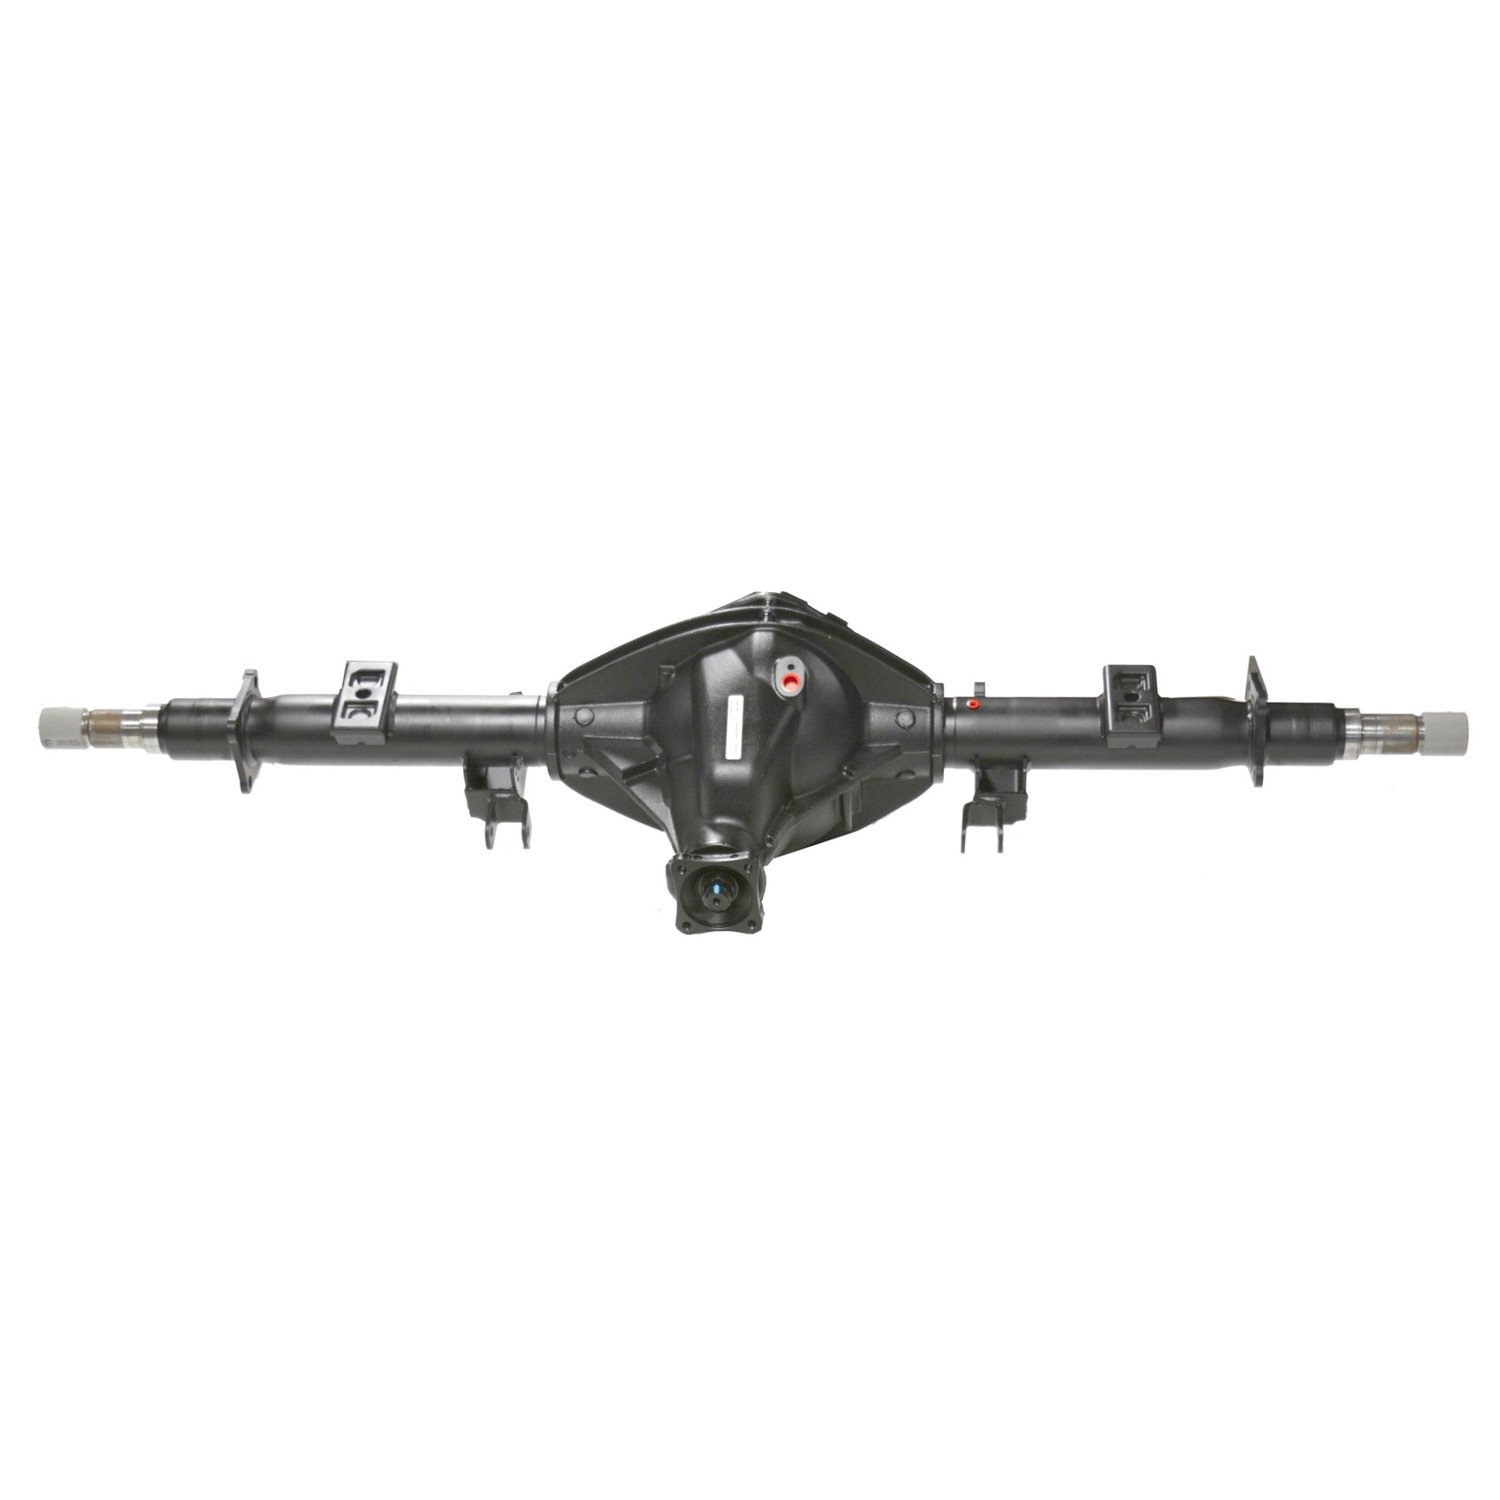 Remanufactured AAM 11.5" AXLE ASSY '06-'08 CHY RAM DRW 3500 ('07-'08 EXC CAB-CHASSIS) 3.73, 2WD